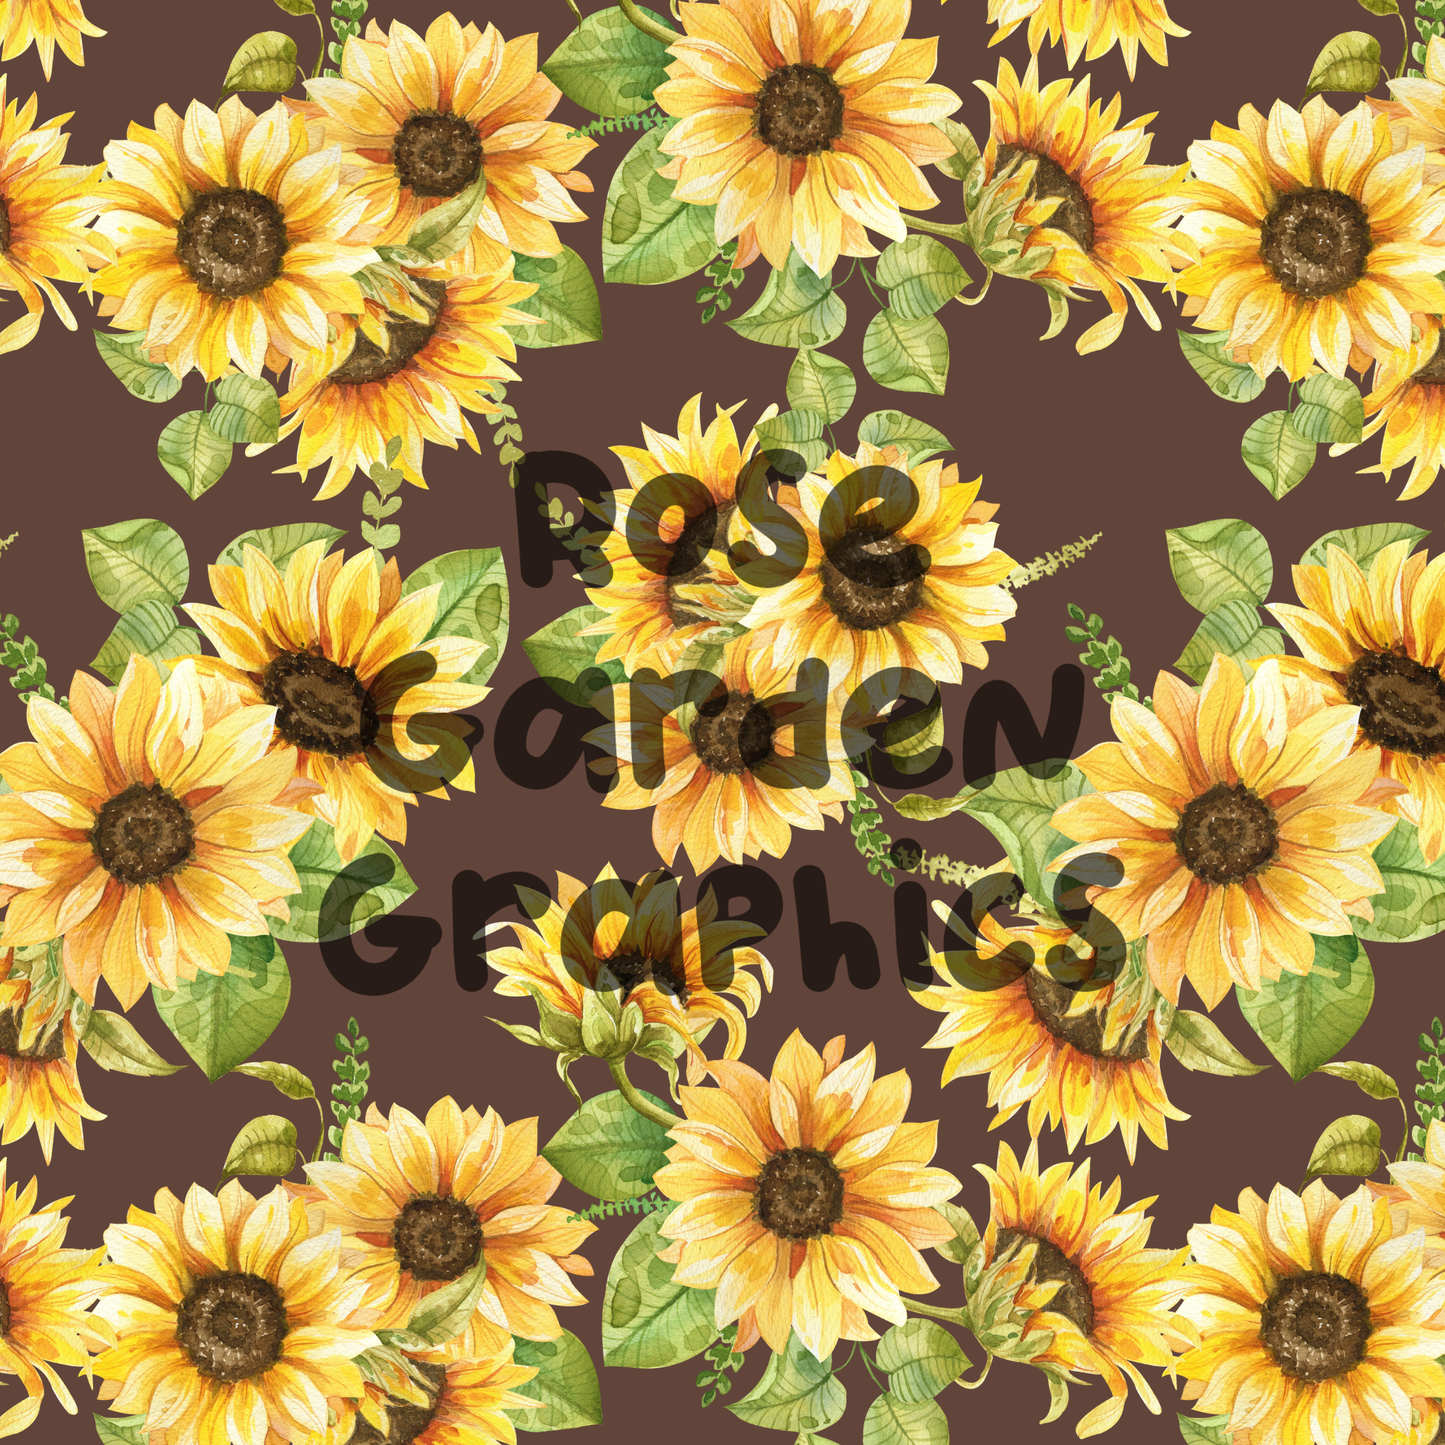 Sunflowers on Solids Seamless Image Collection